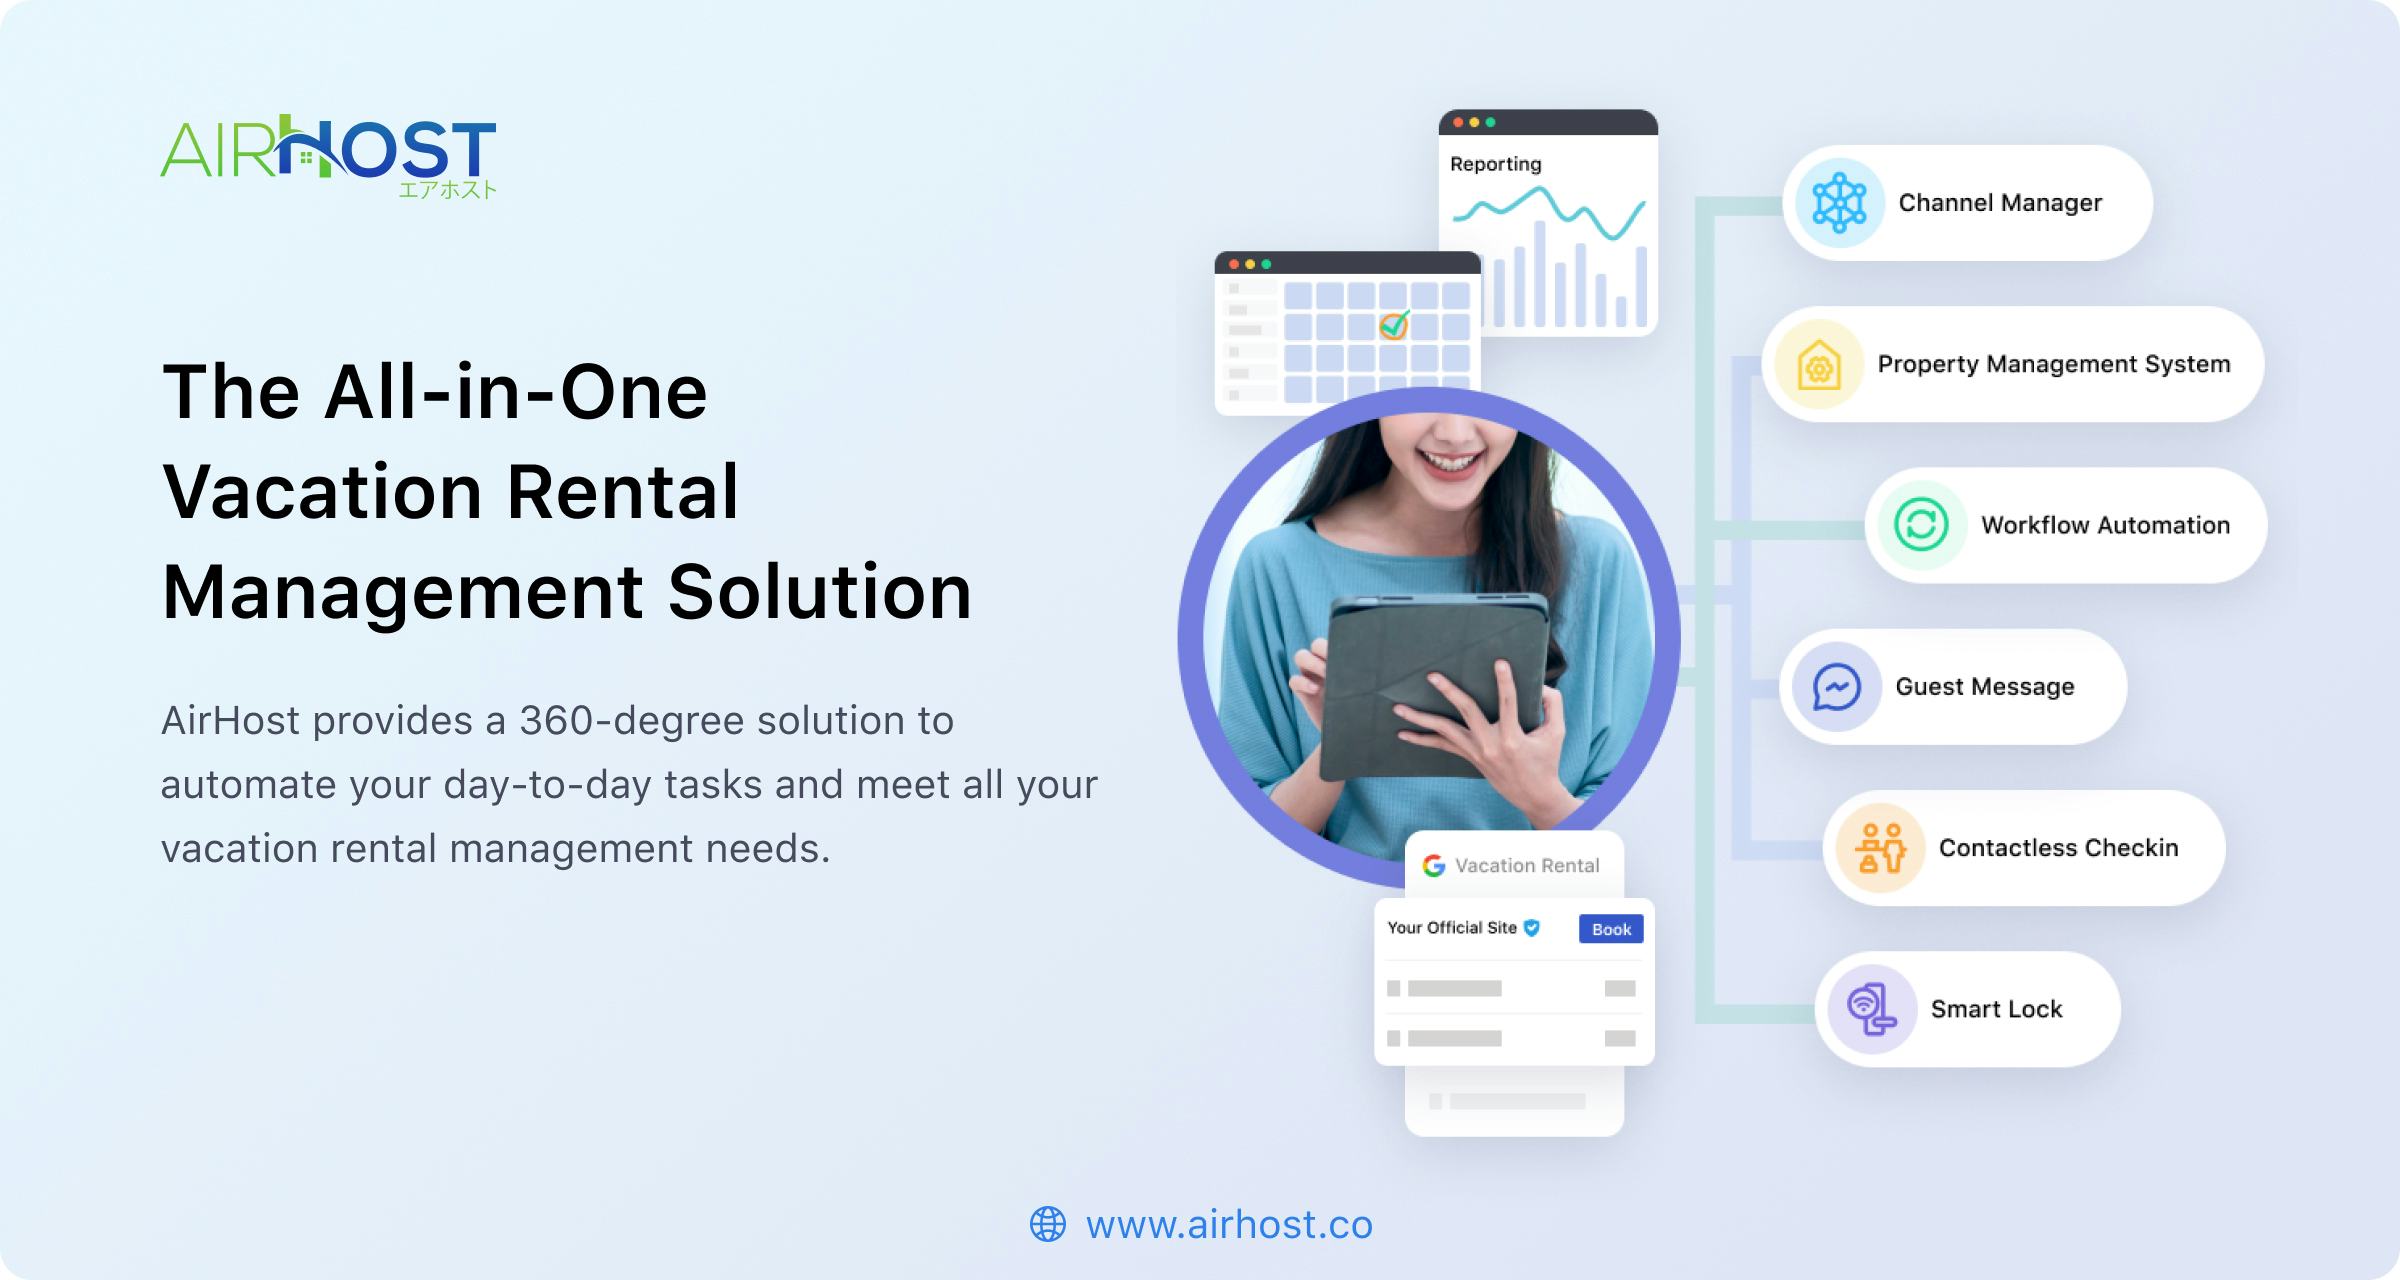 AirHost Software - All-in-One Vacation Rental Management Solution